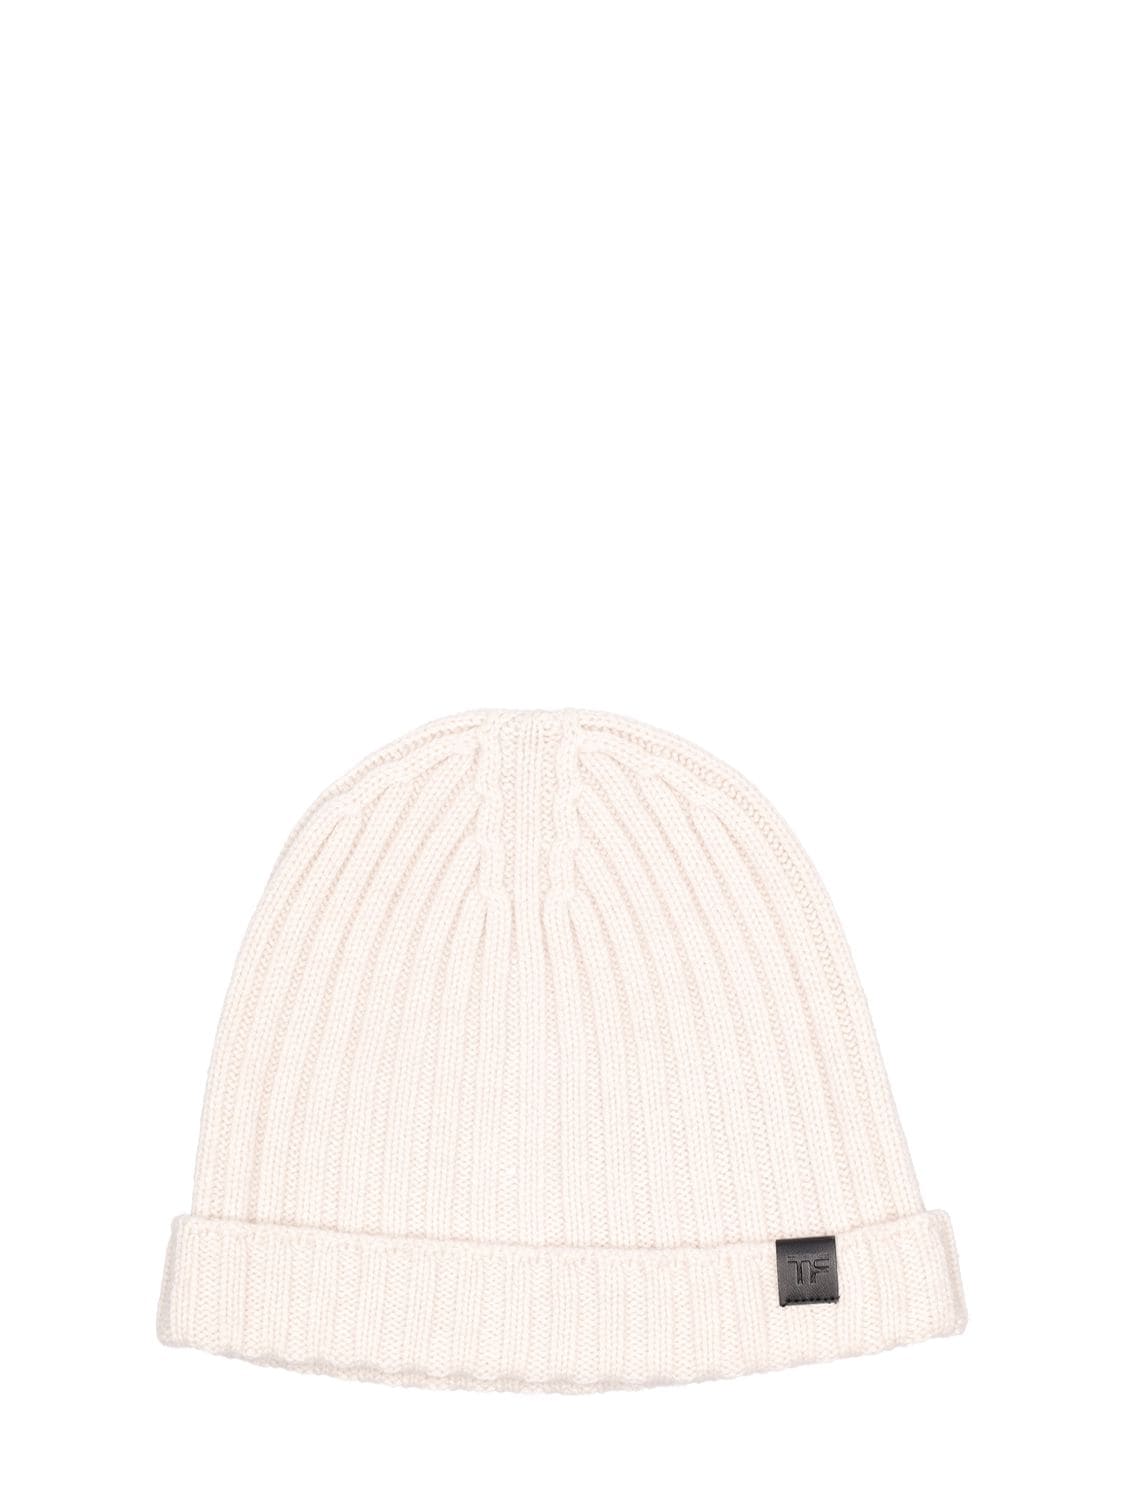 TOM FORD Cashmere Ribbed Beanie Hat